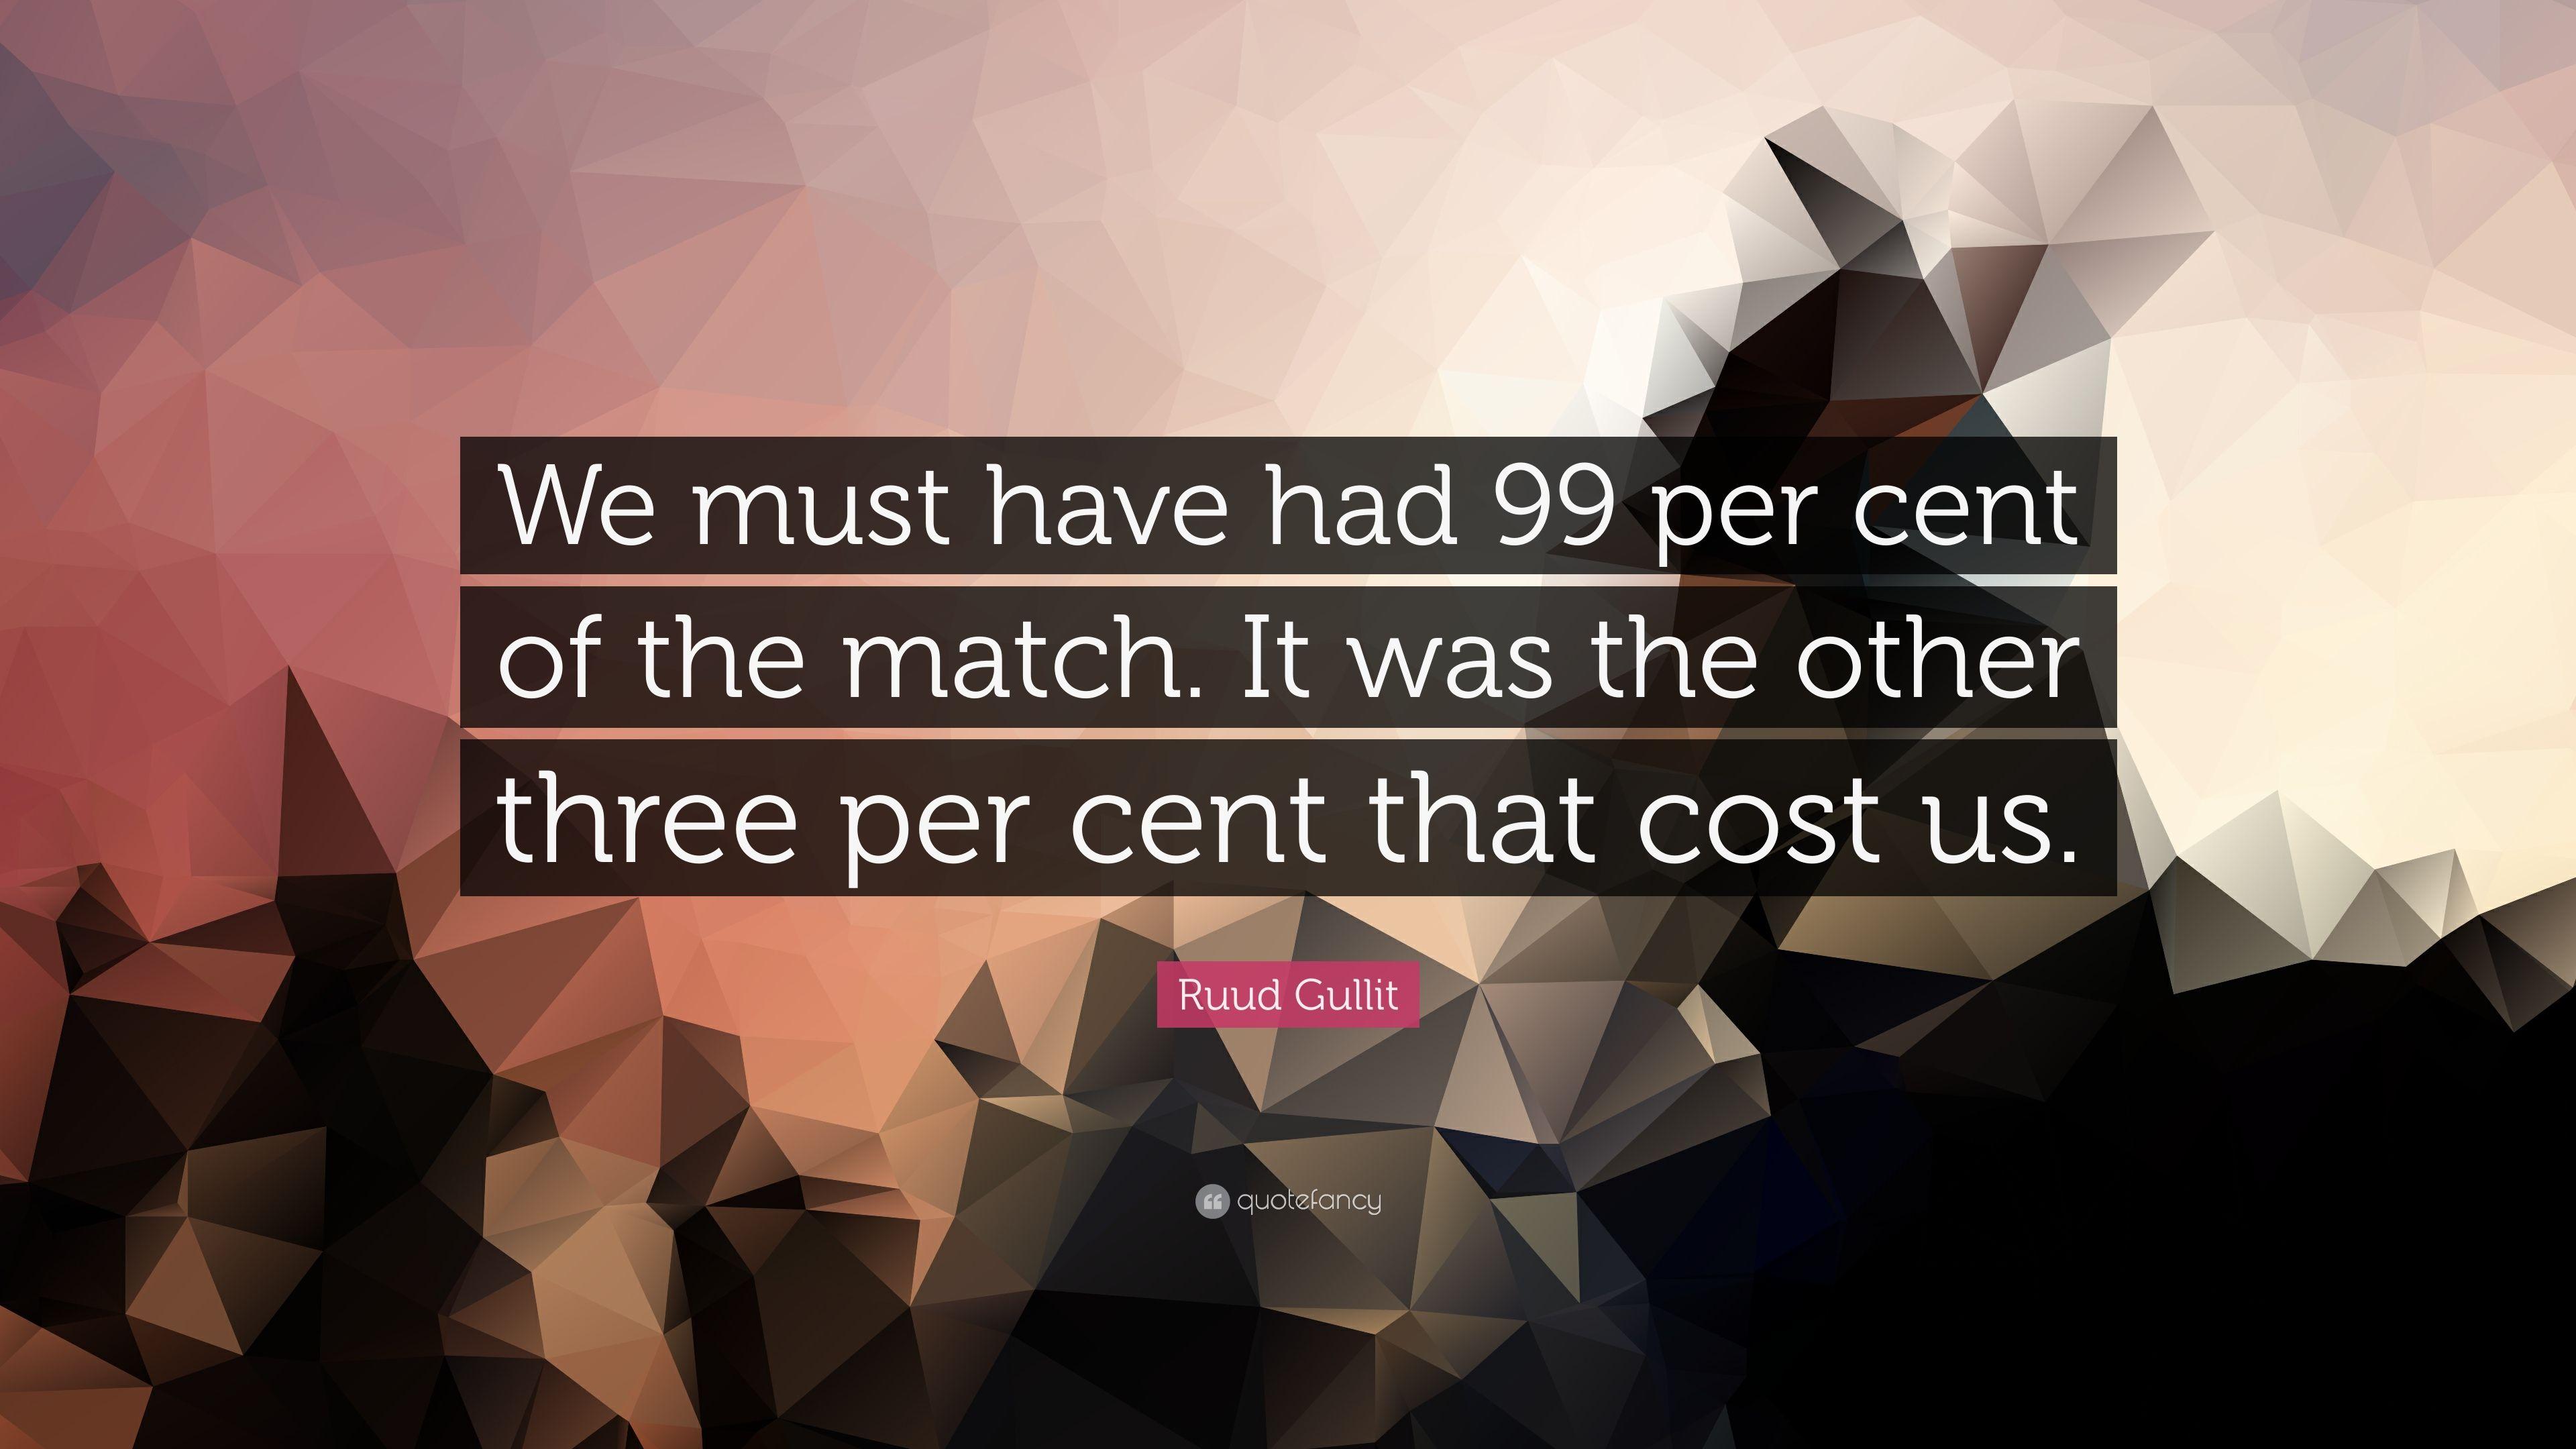 Ruud Gullit Quote: “We must have had 99 per cent of the match. It